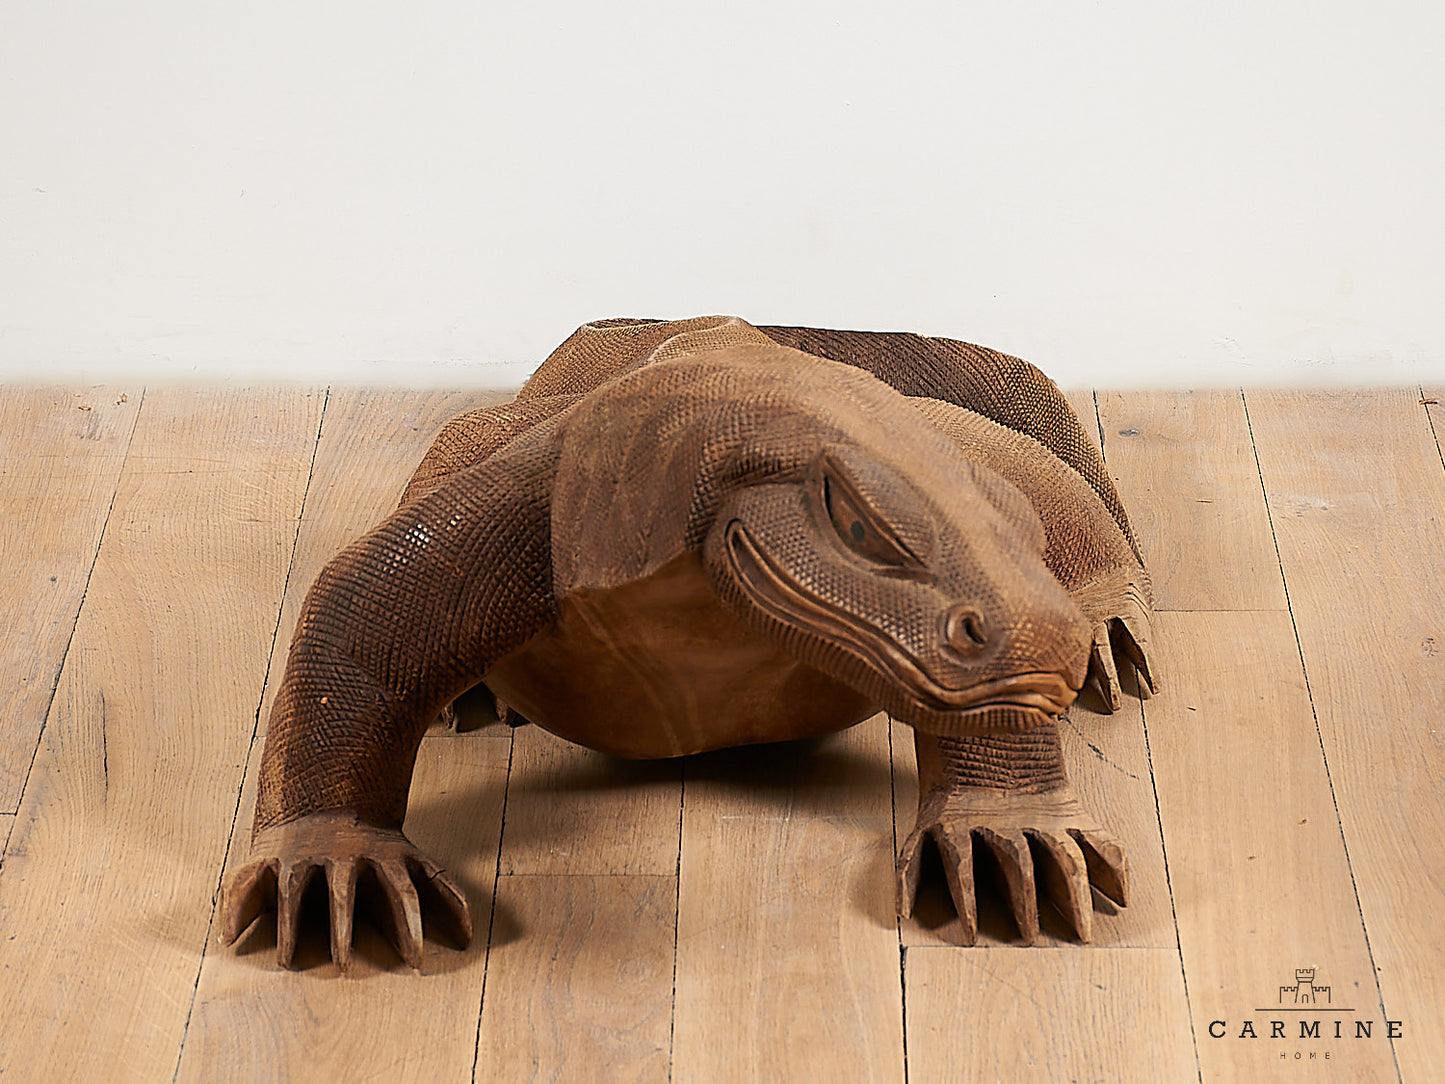 Monitor lizard, carved wood